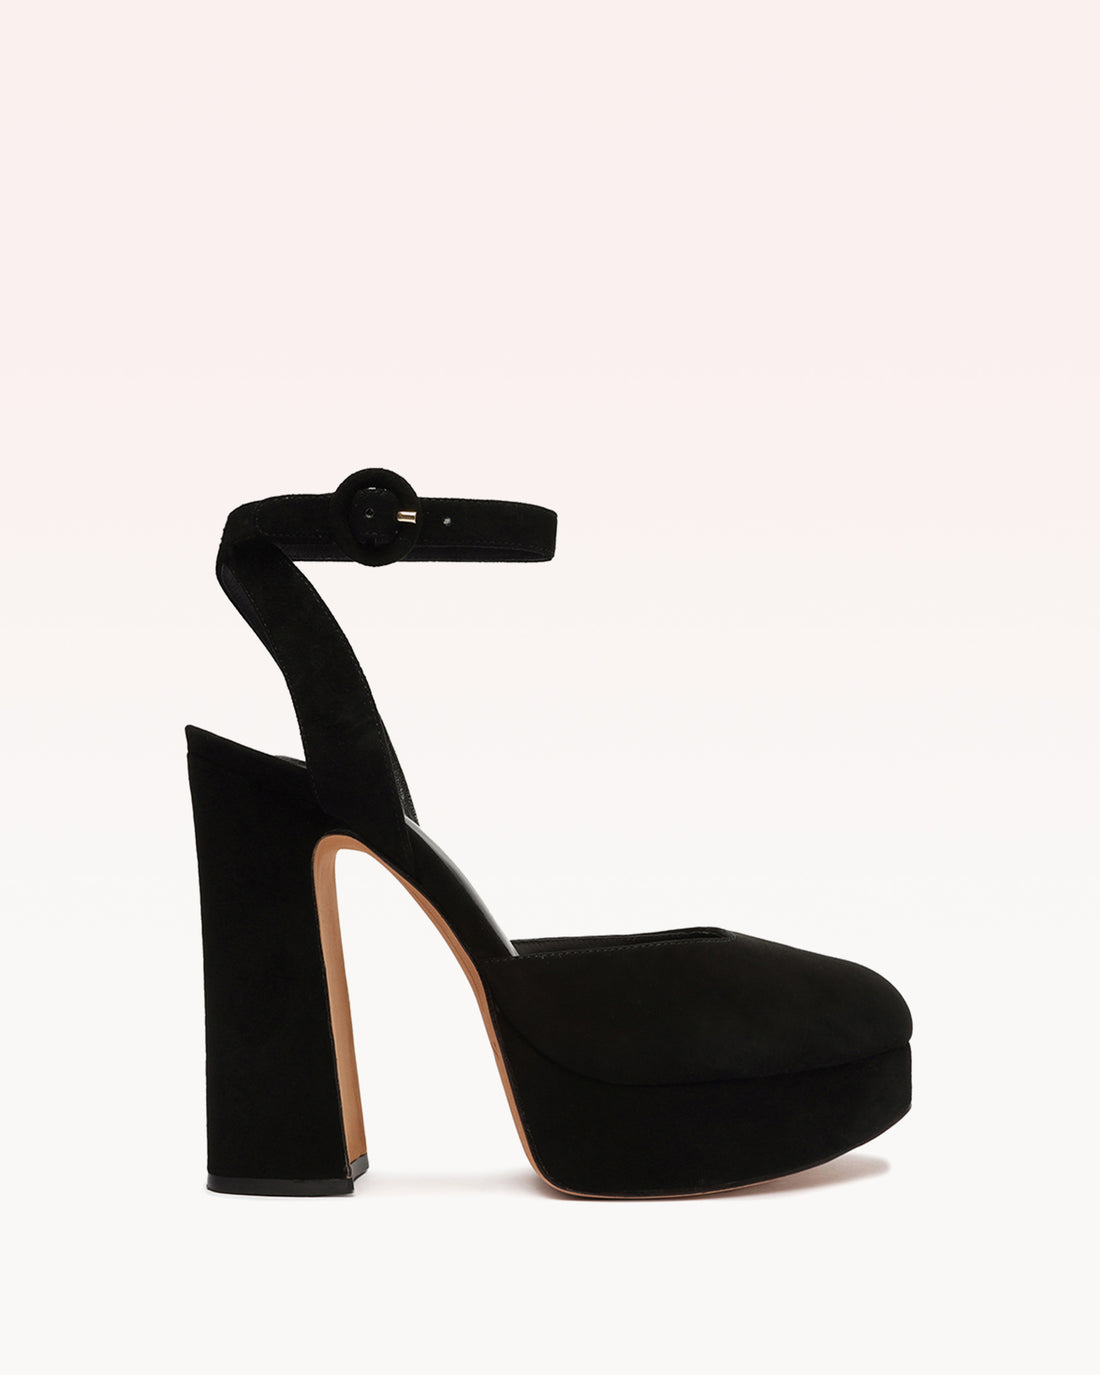 Rise to the occasion in the sky-high platform heels we're obsessed with